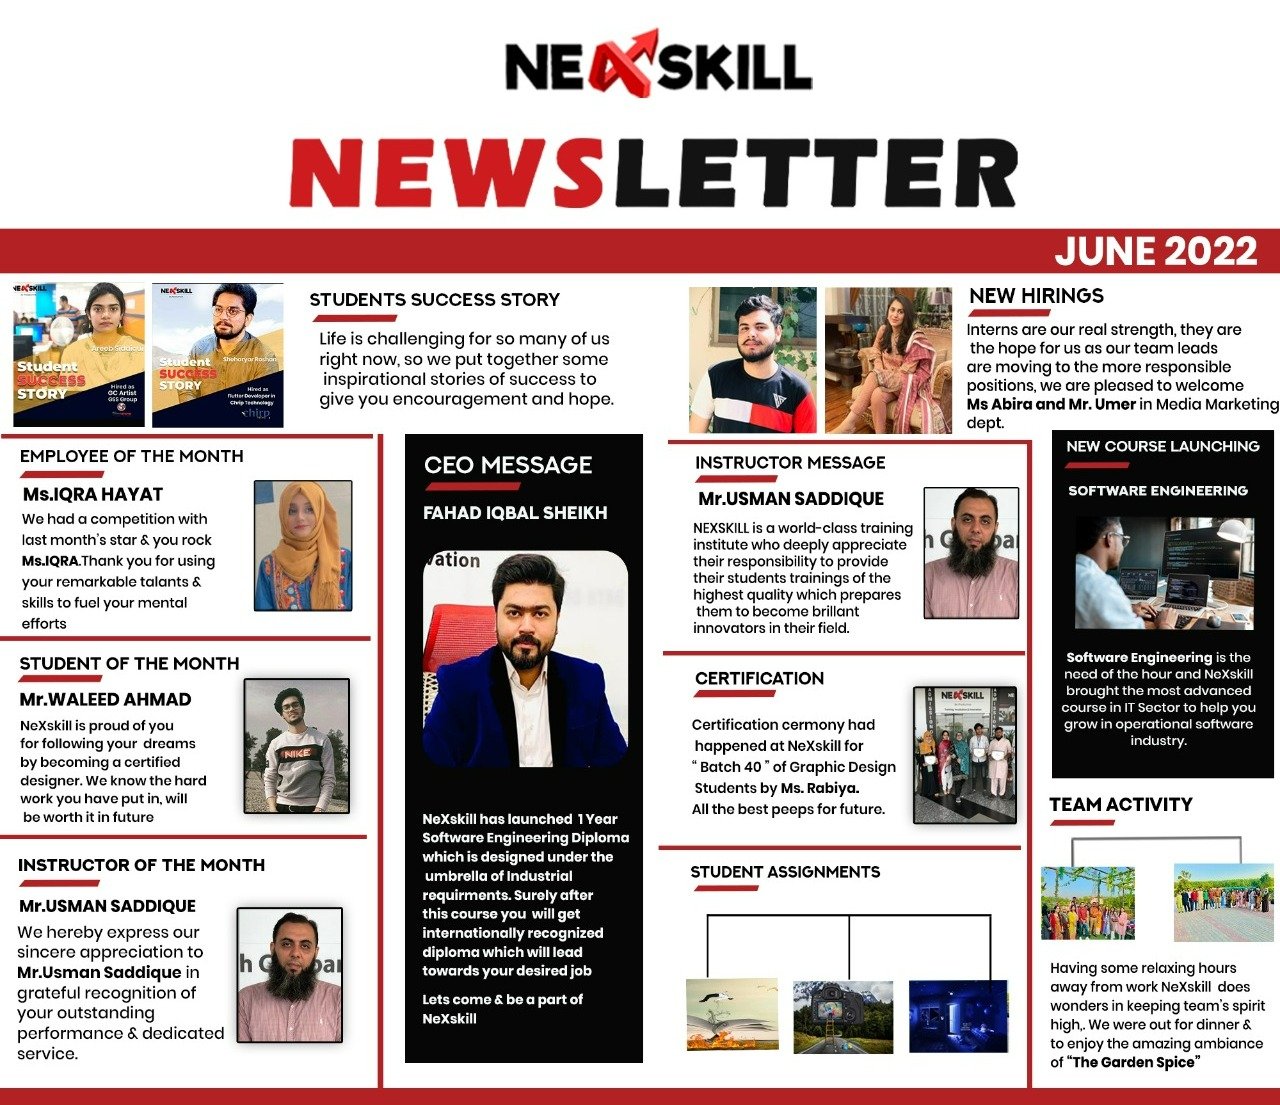 NEWSLETTER OF THE MONTH JUNE 2022